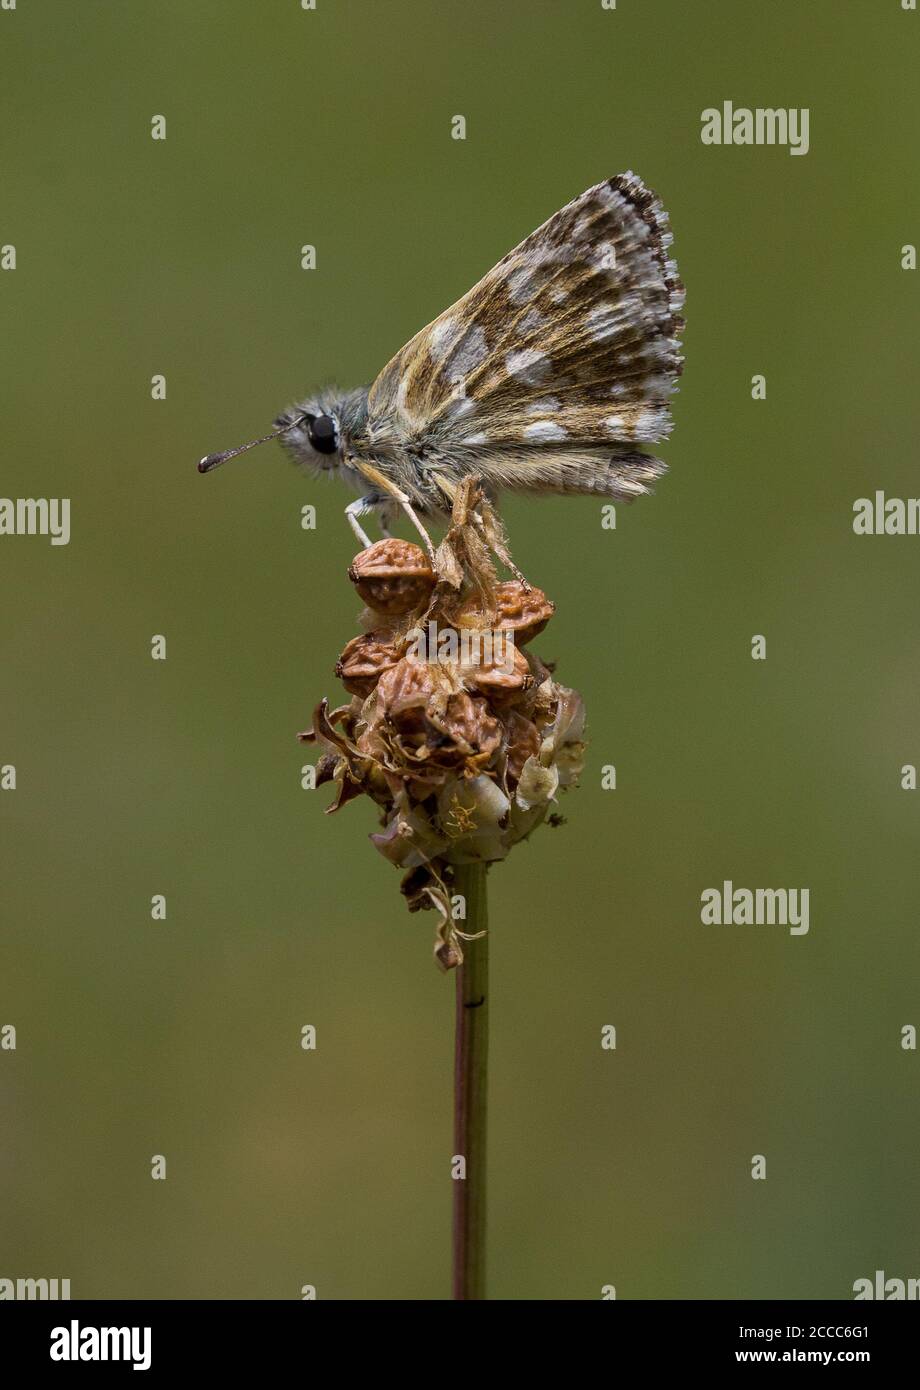 Hungarian or Orbed Red Underwing Skipper (Spialia orbifer) perched on a seedhead Stock Photo